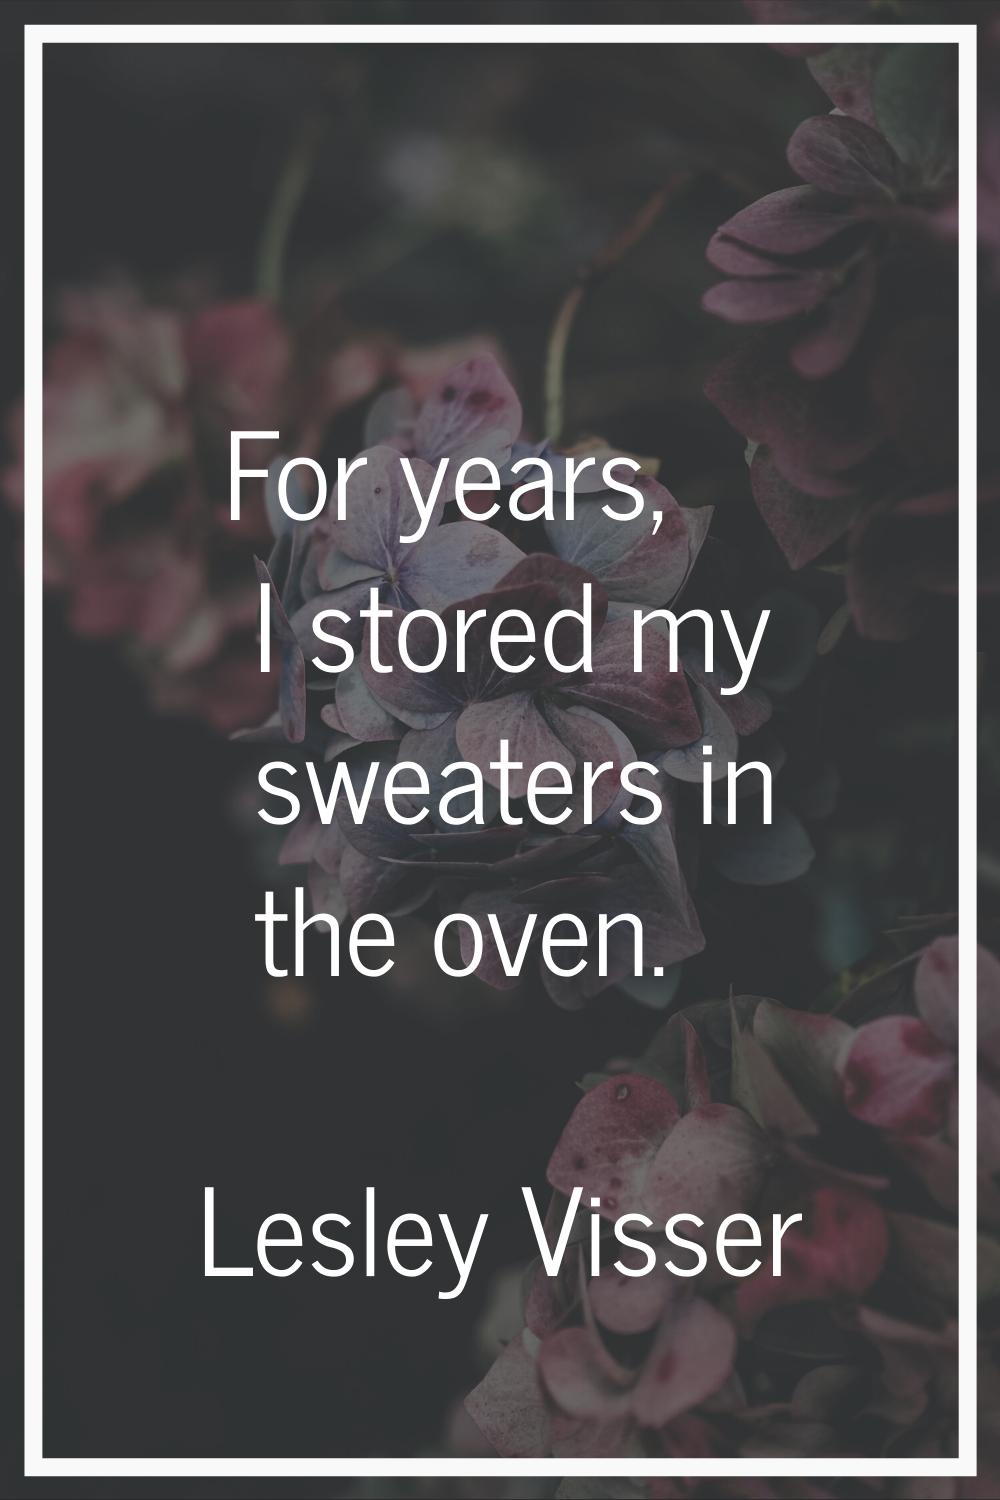 For years, I stored my sweaters in the oven.